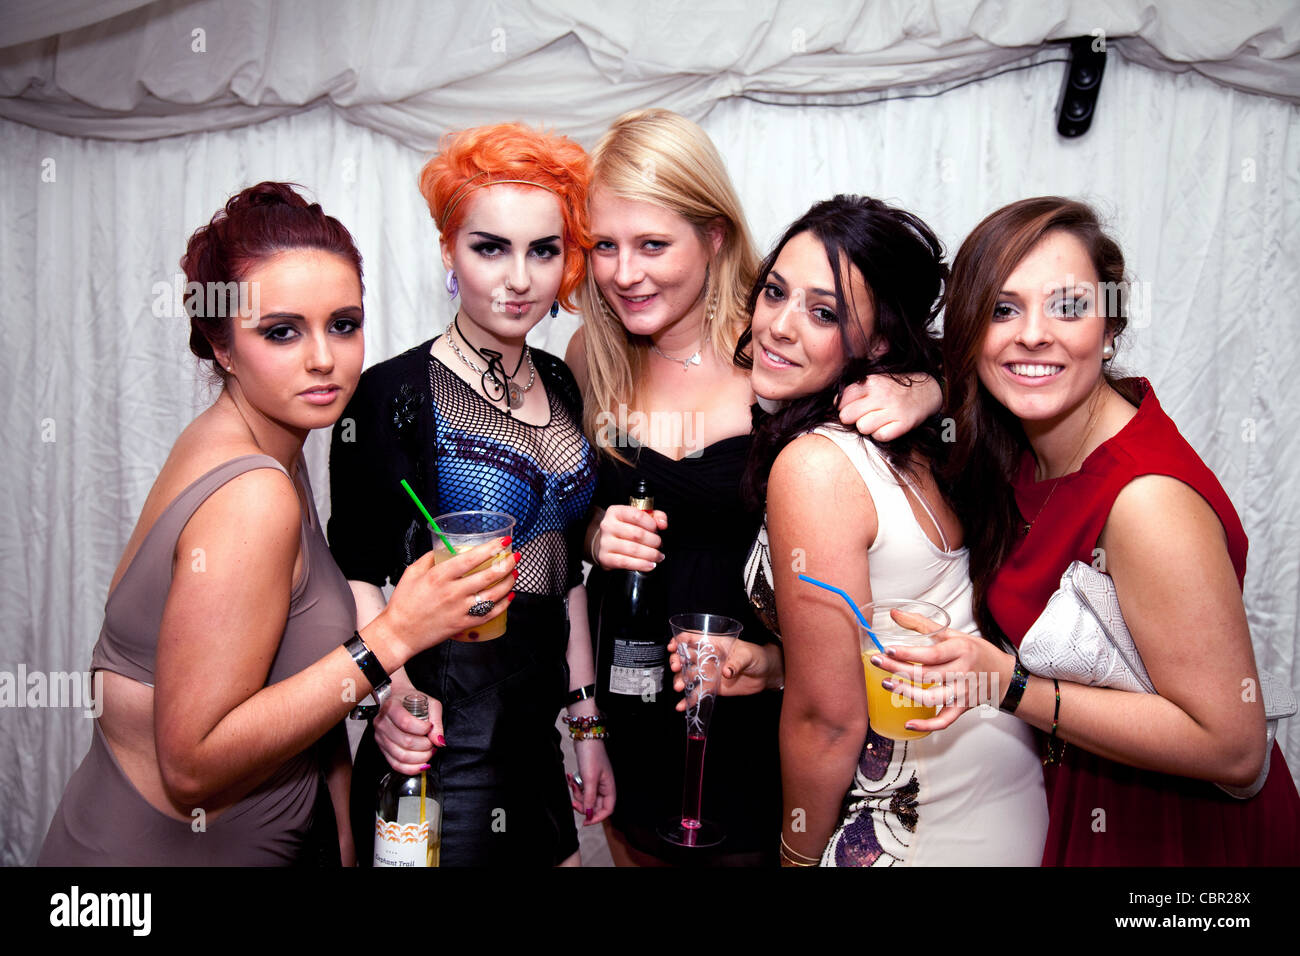 A group of five teens teenage girls with alcohol at a party, England, UK Stock Photo